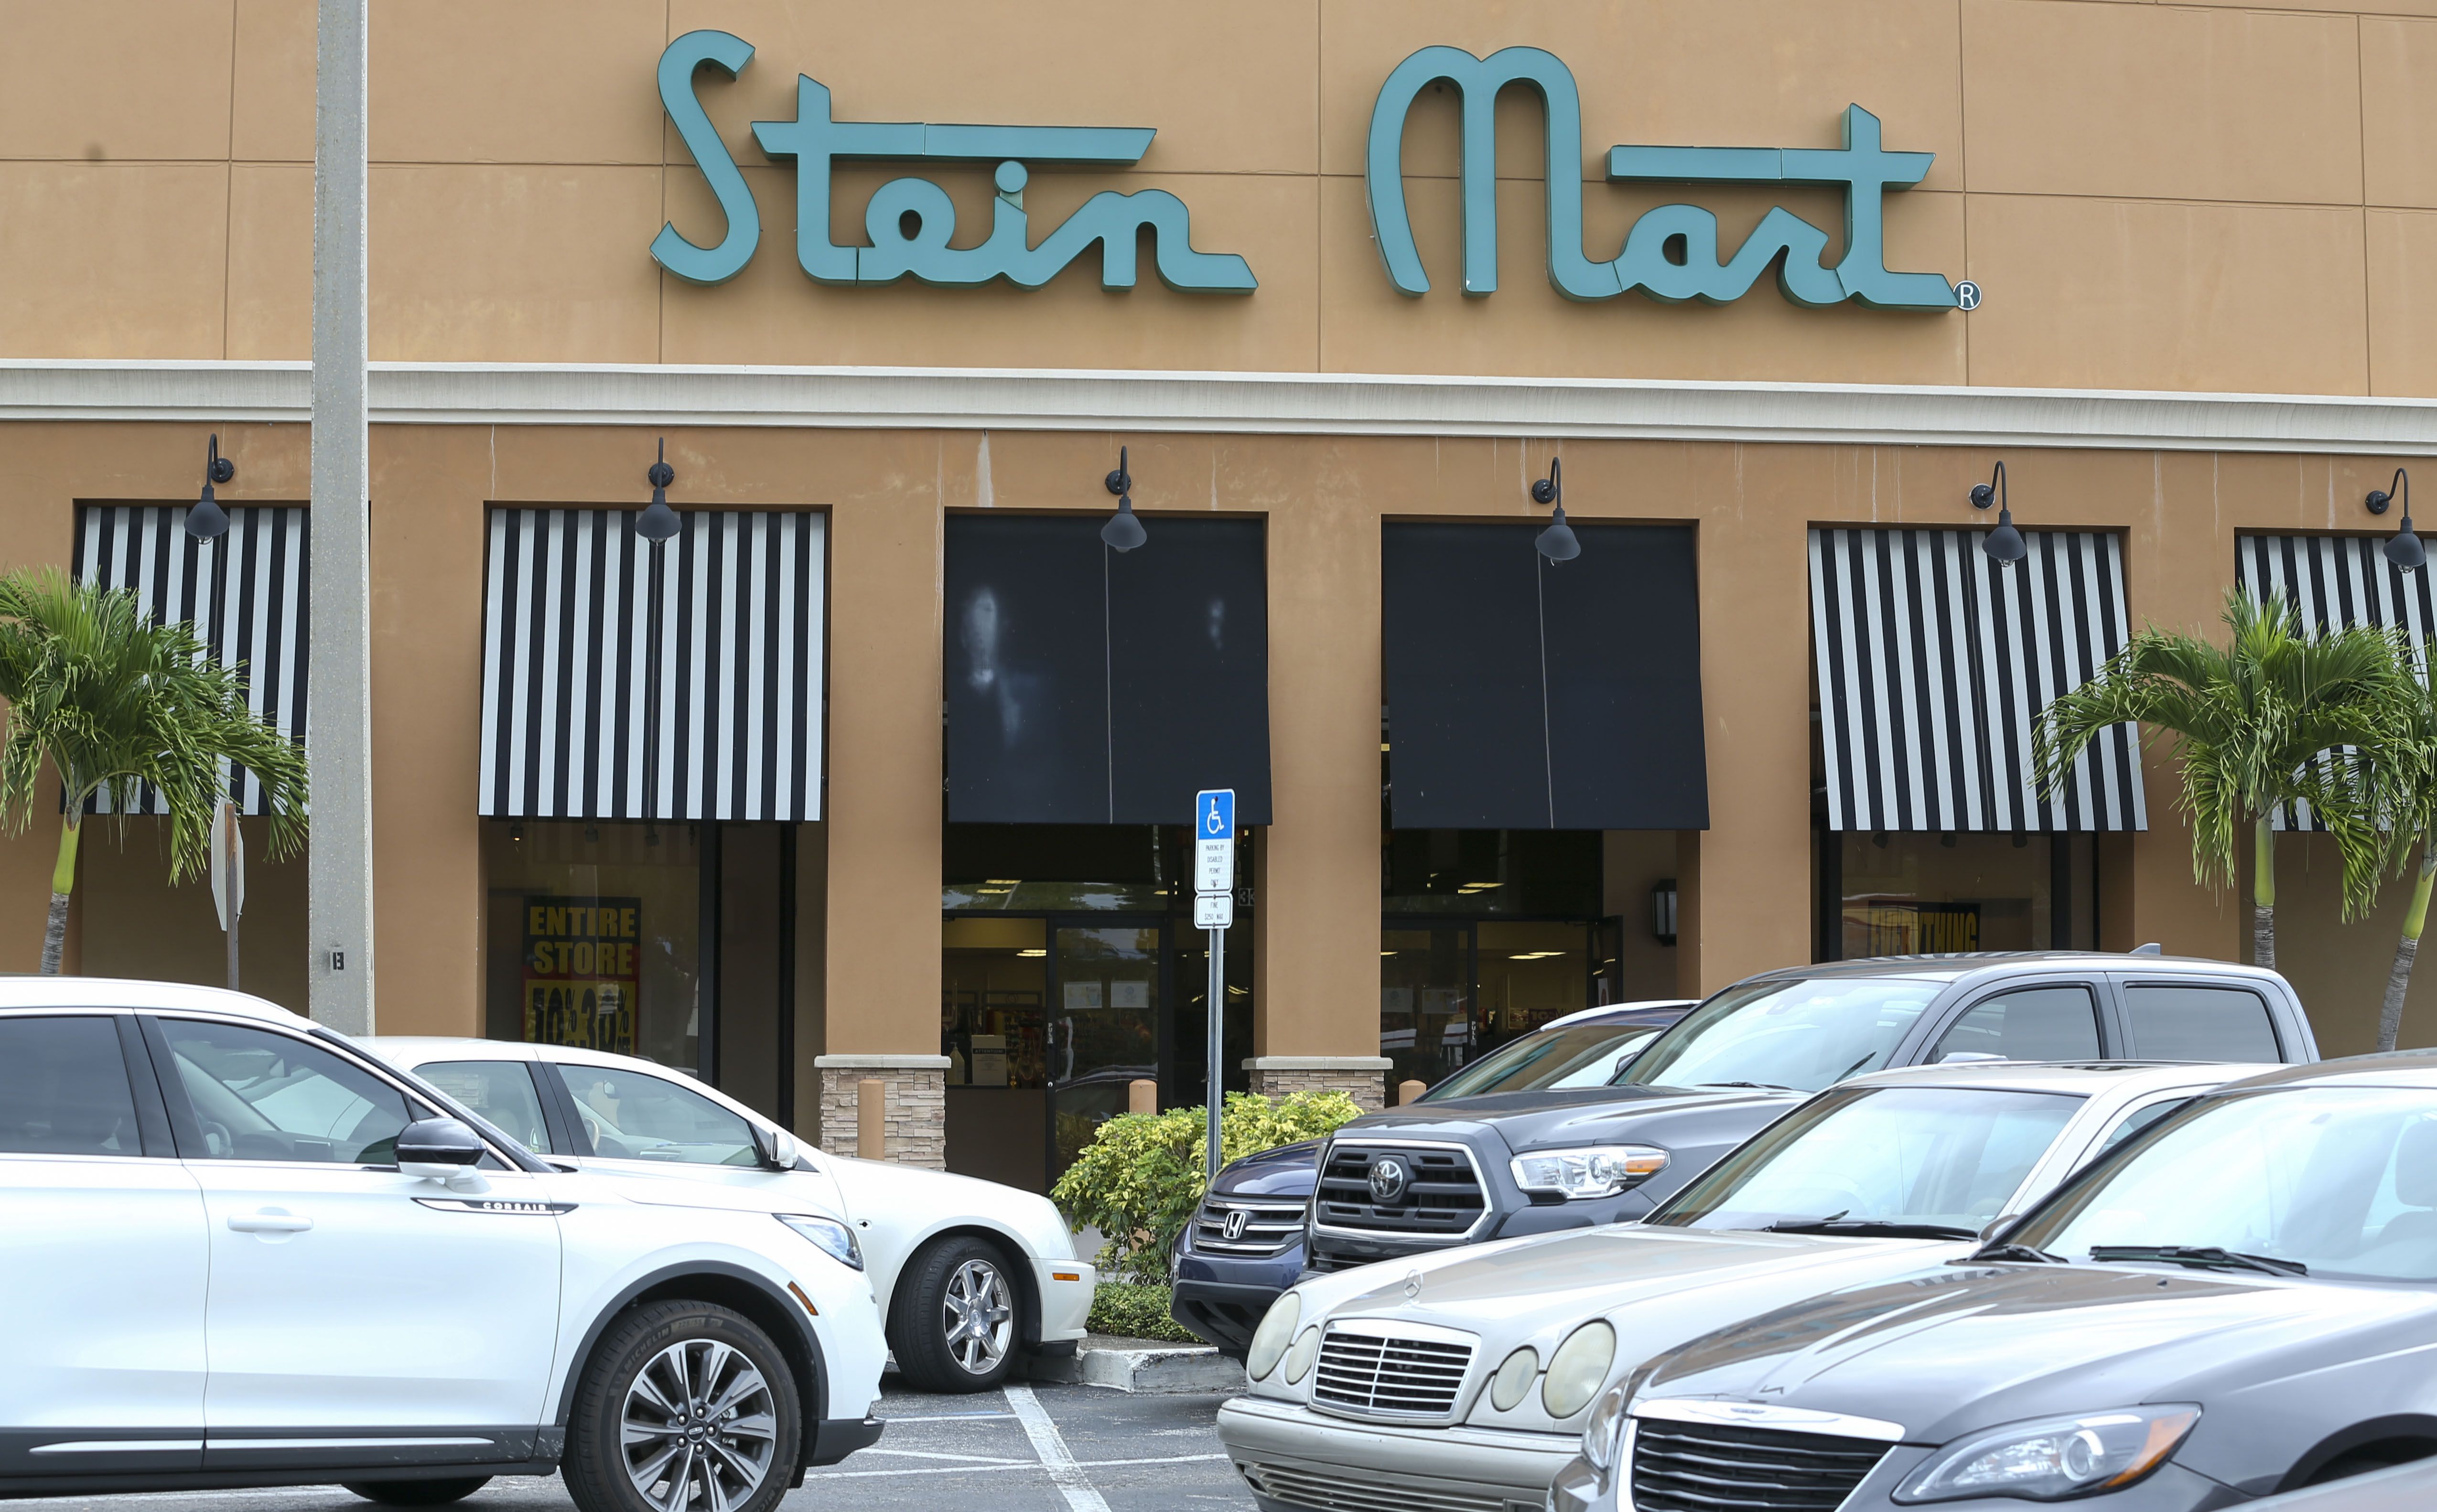 It's goodbye for Stein Mart, the Florida retailer will close every store